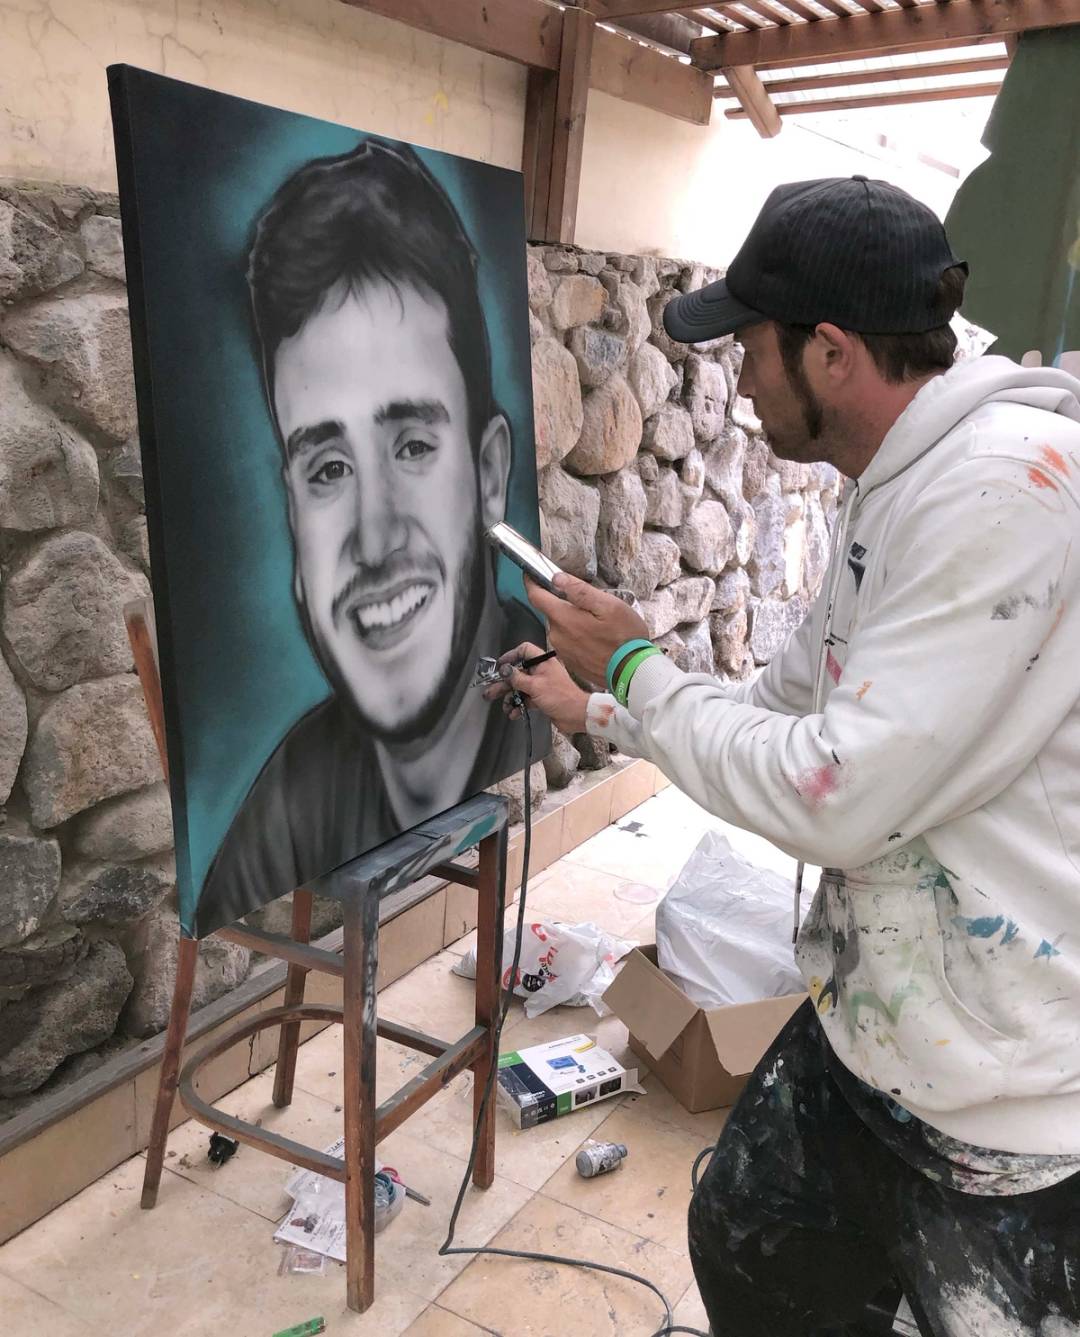 Artist Benzi Brofman completes a portrait of Reef Harush, a sergeant in the IDF who was killed in Gaza